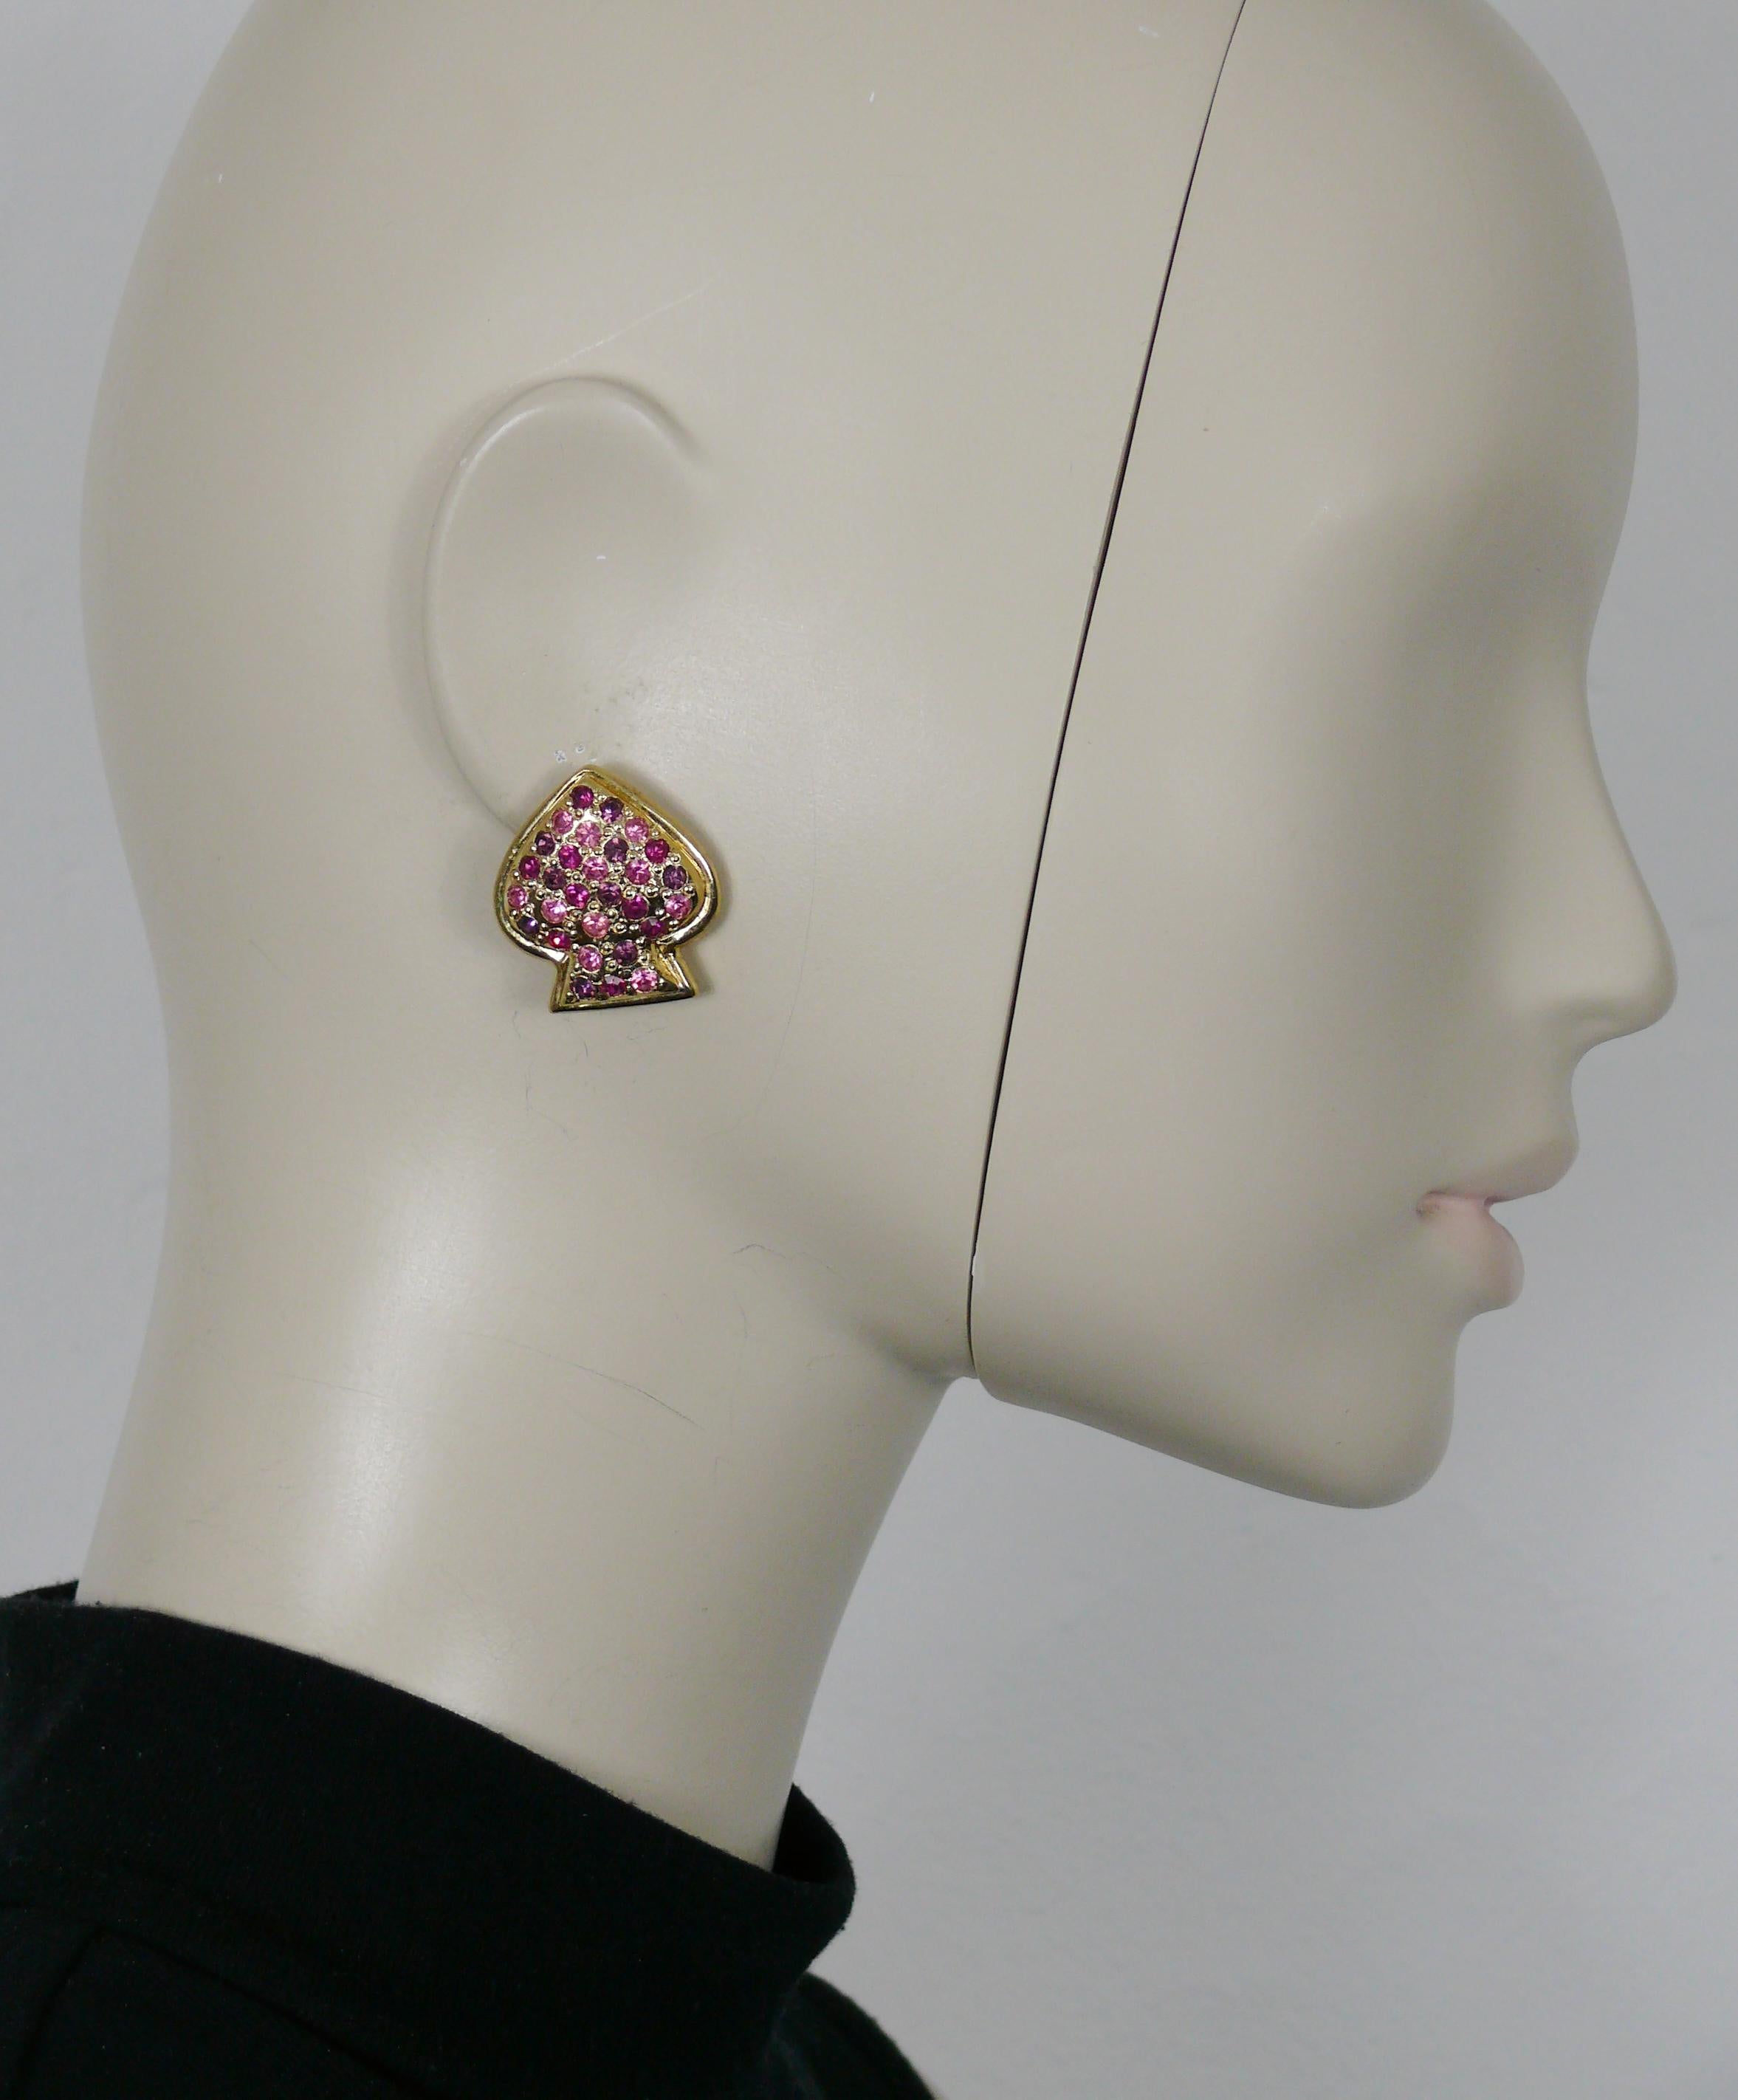 YVES SAINT LAURENT vintage clip-on earrings featuring a spade embellished with pink shade crystals.

Embossed YSL.

Indicative measurements : max. height approx. 2.8 cm (1.10 inches) / max. width approx. 2.5 cm (0.98 inch).

Weight per earrings :